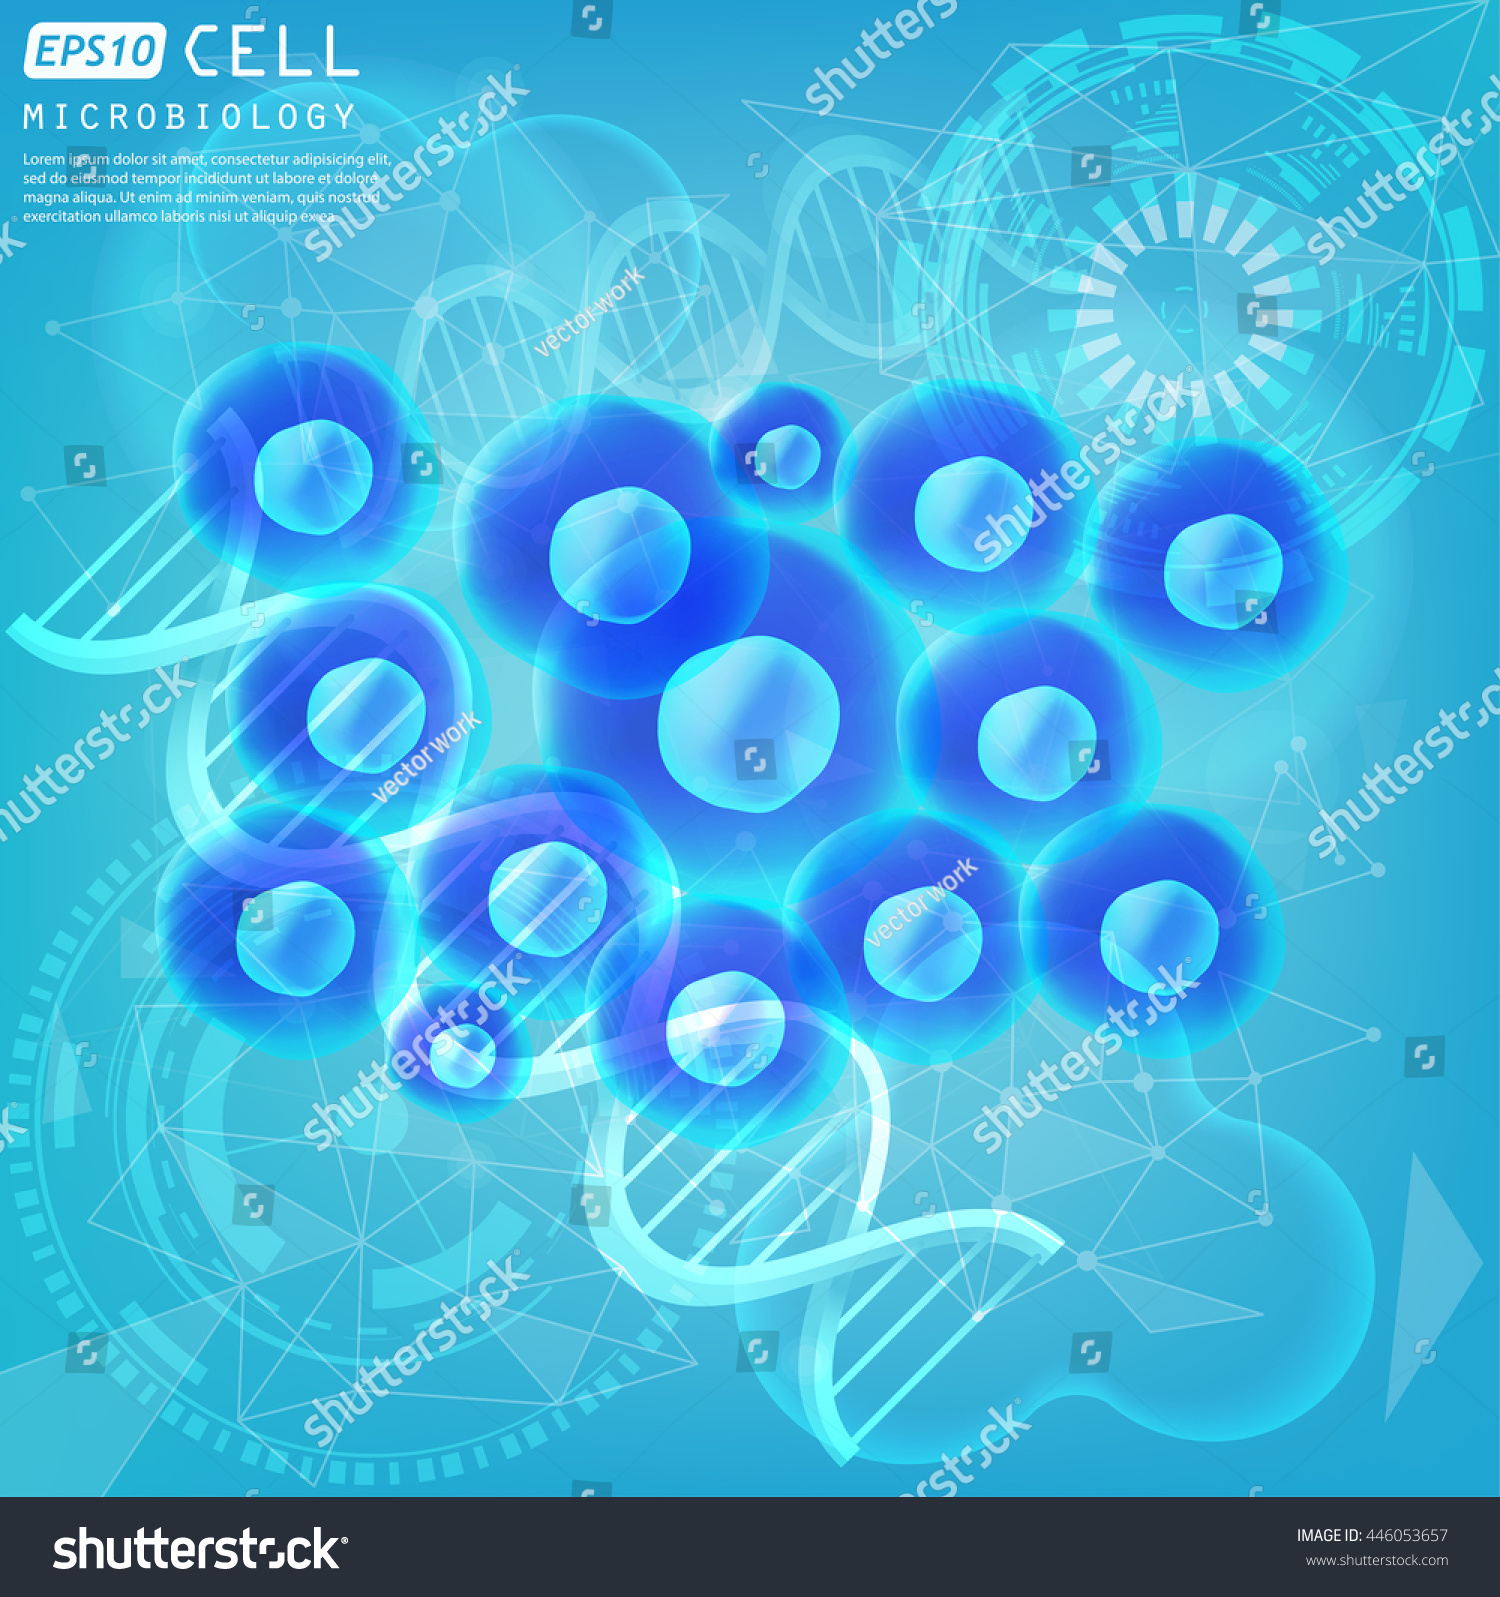 Blue Cells Under Microscope Microbiology Scientific Stock Vector ...